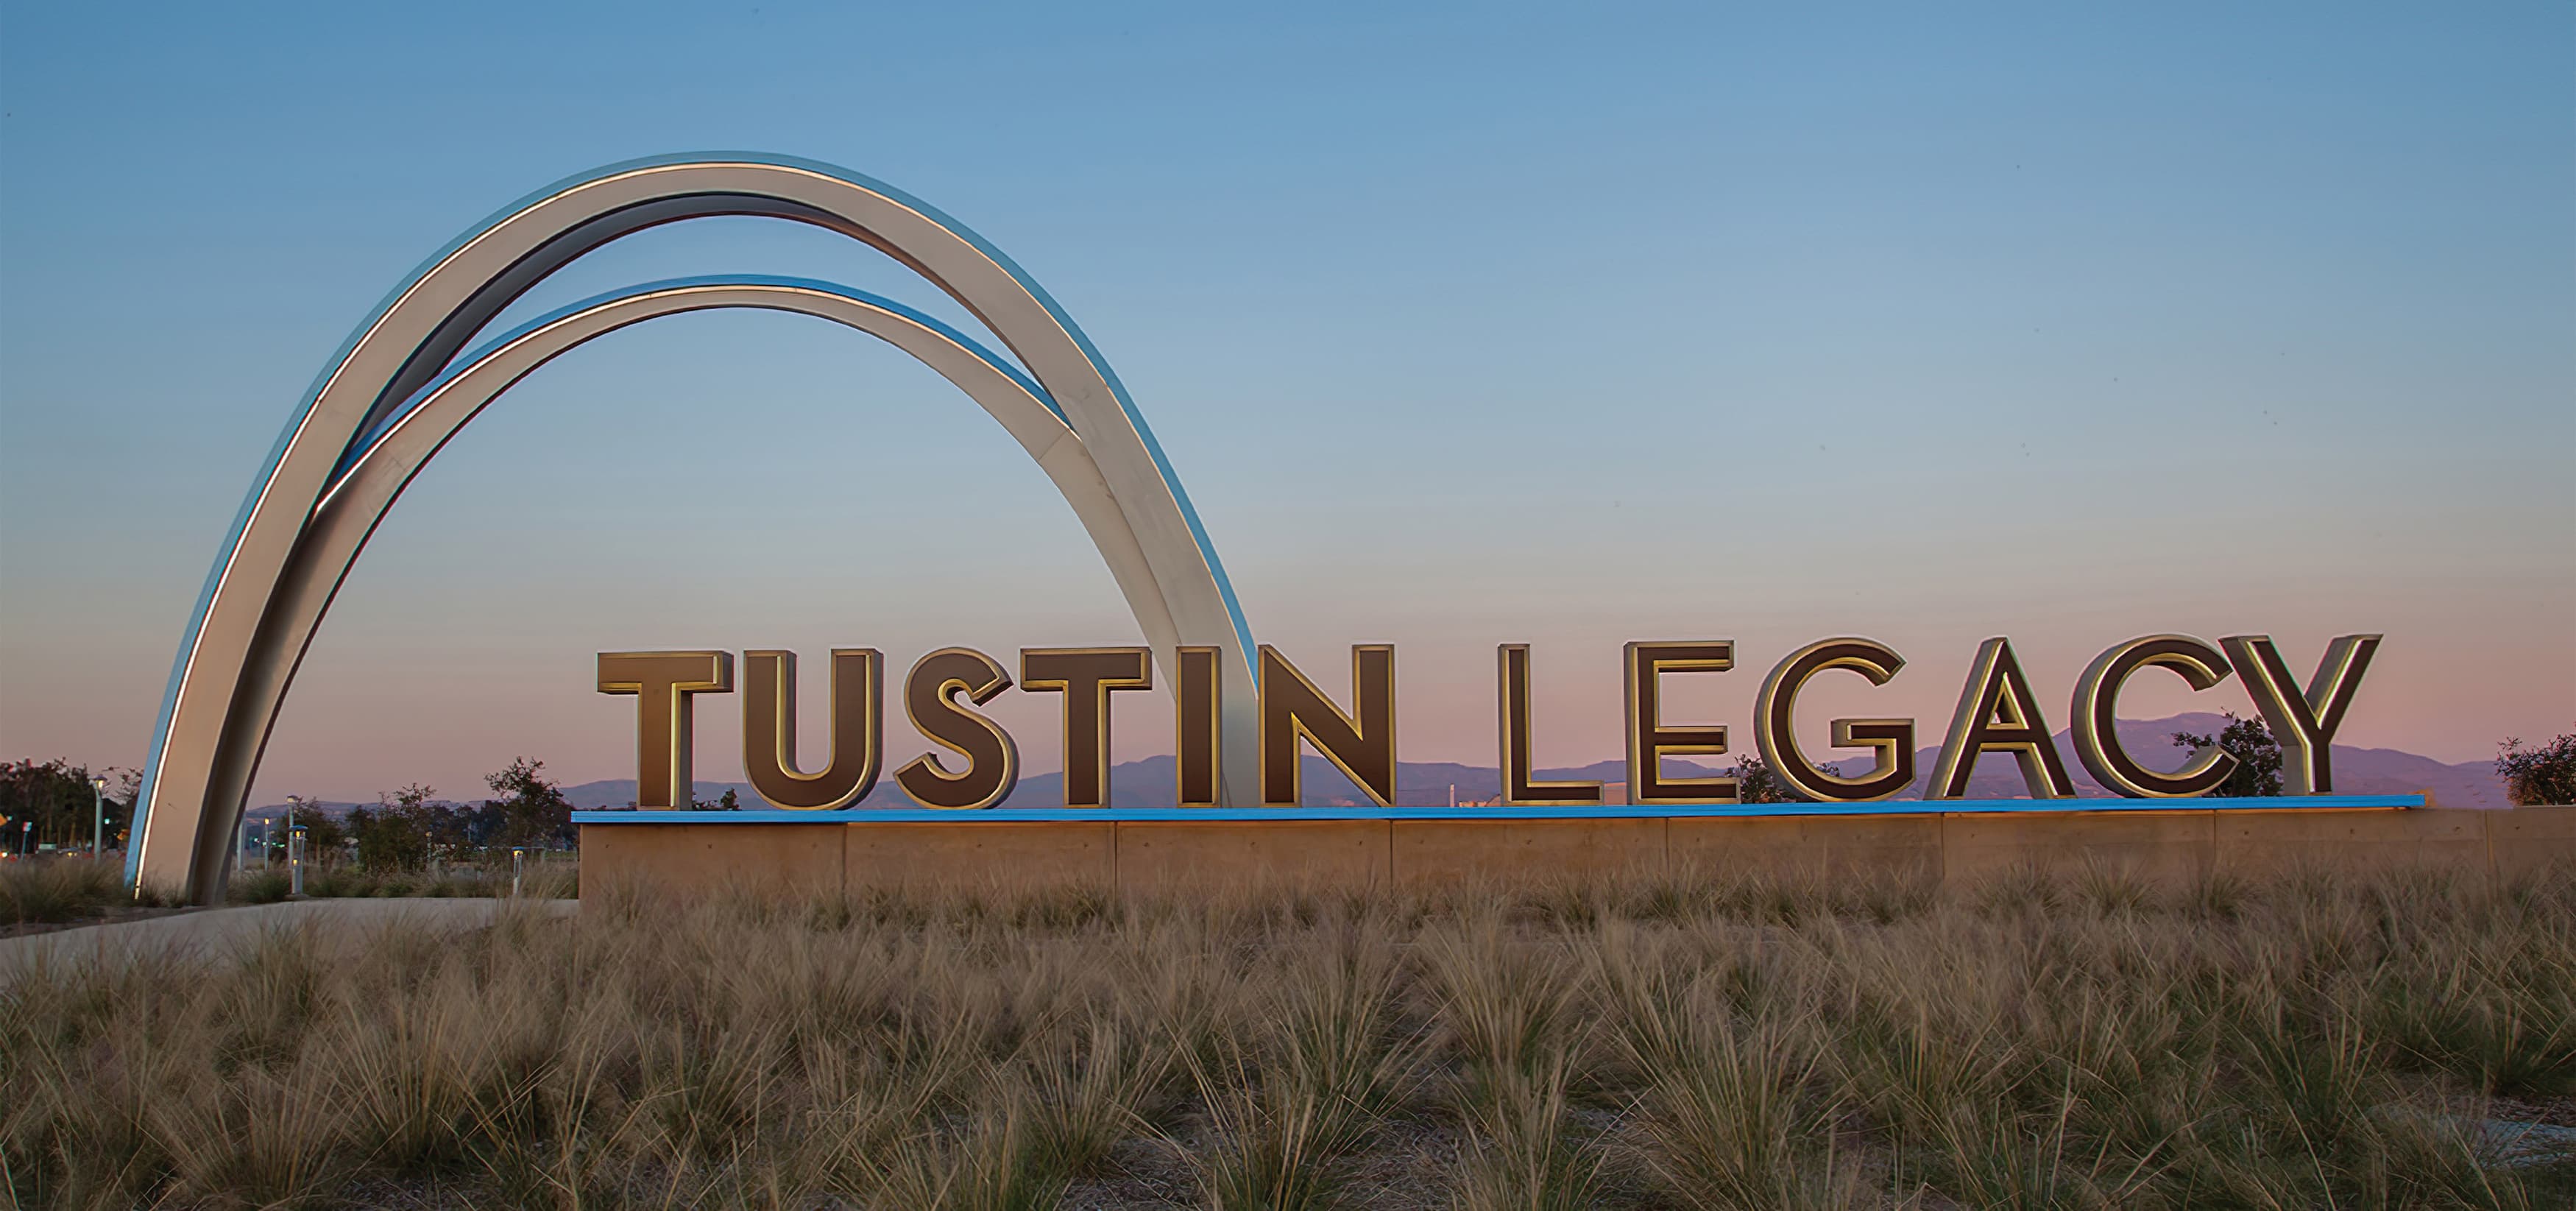 Tustin Legacy, a residential neighborhood in Tustin, California, Project Identity Monument with Iconic Arch